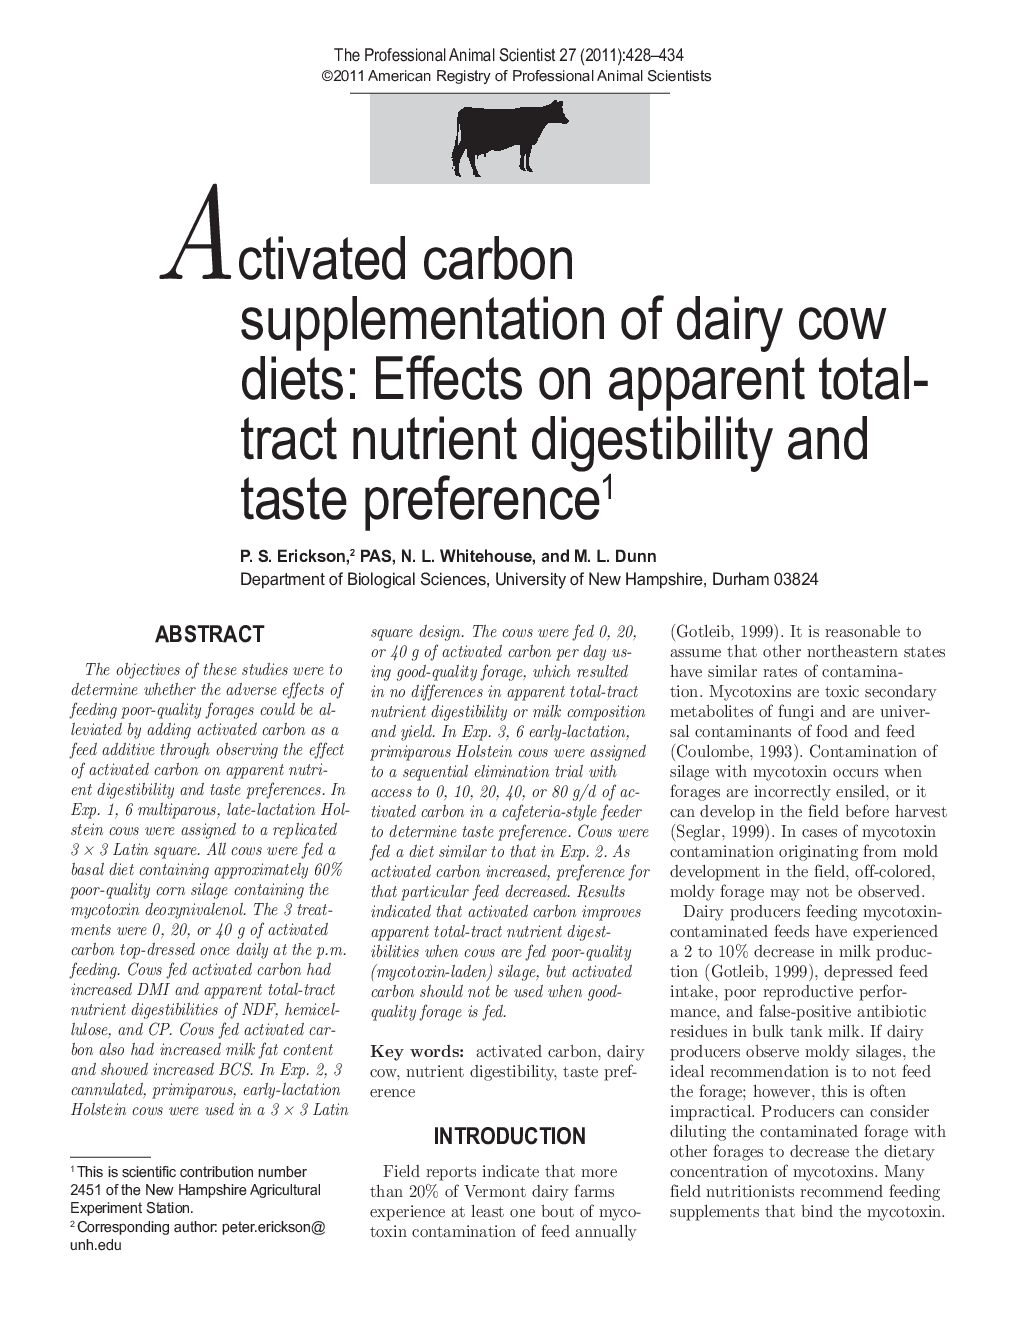 Activated carbon supplementation of dairy cow diets: Effects on apparent total-tract nutrient digestibility and taste preference1